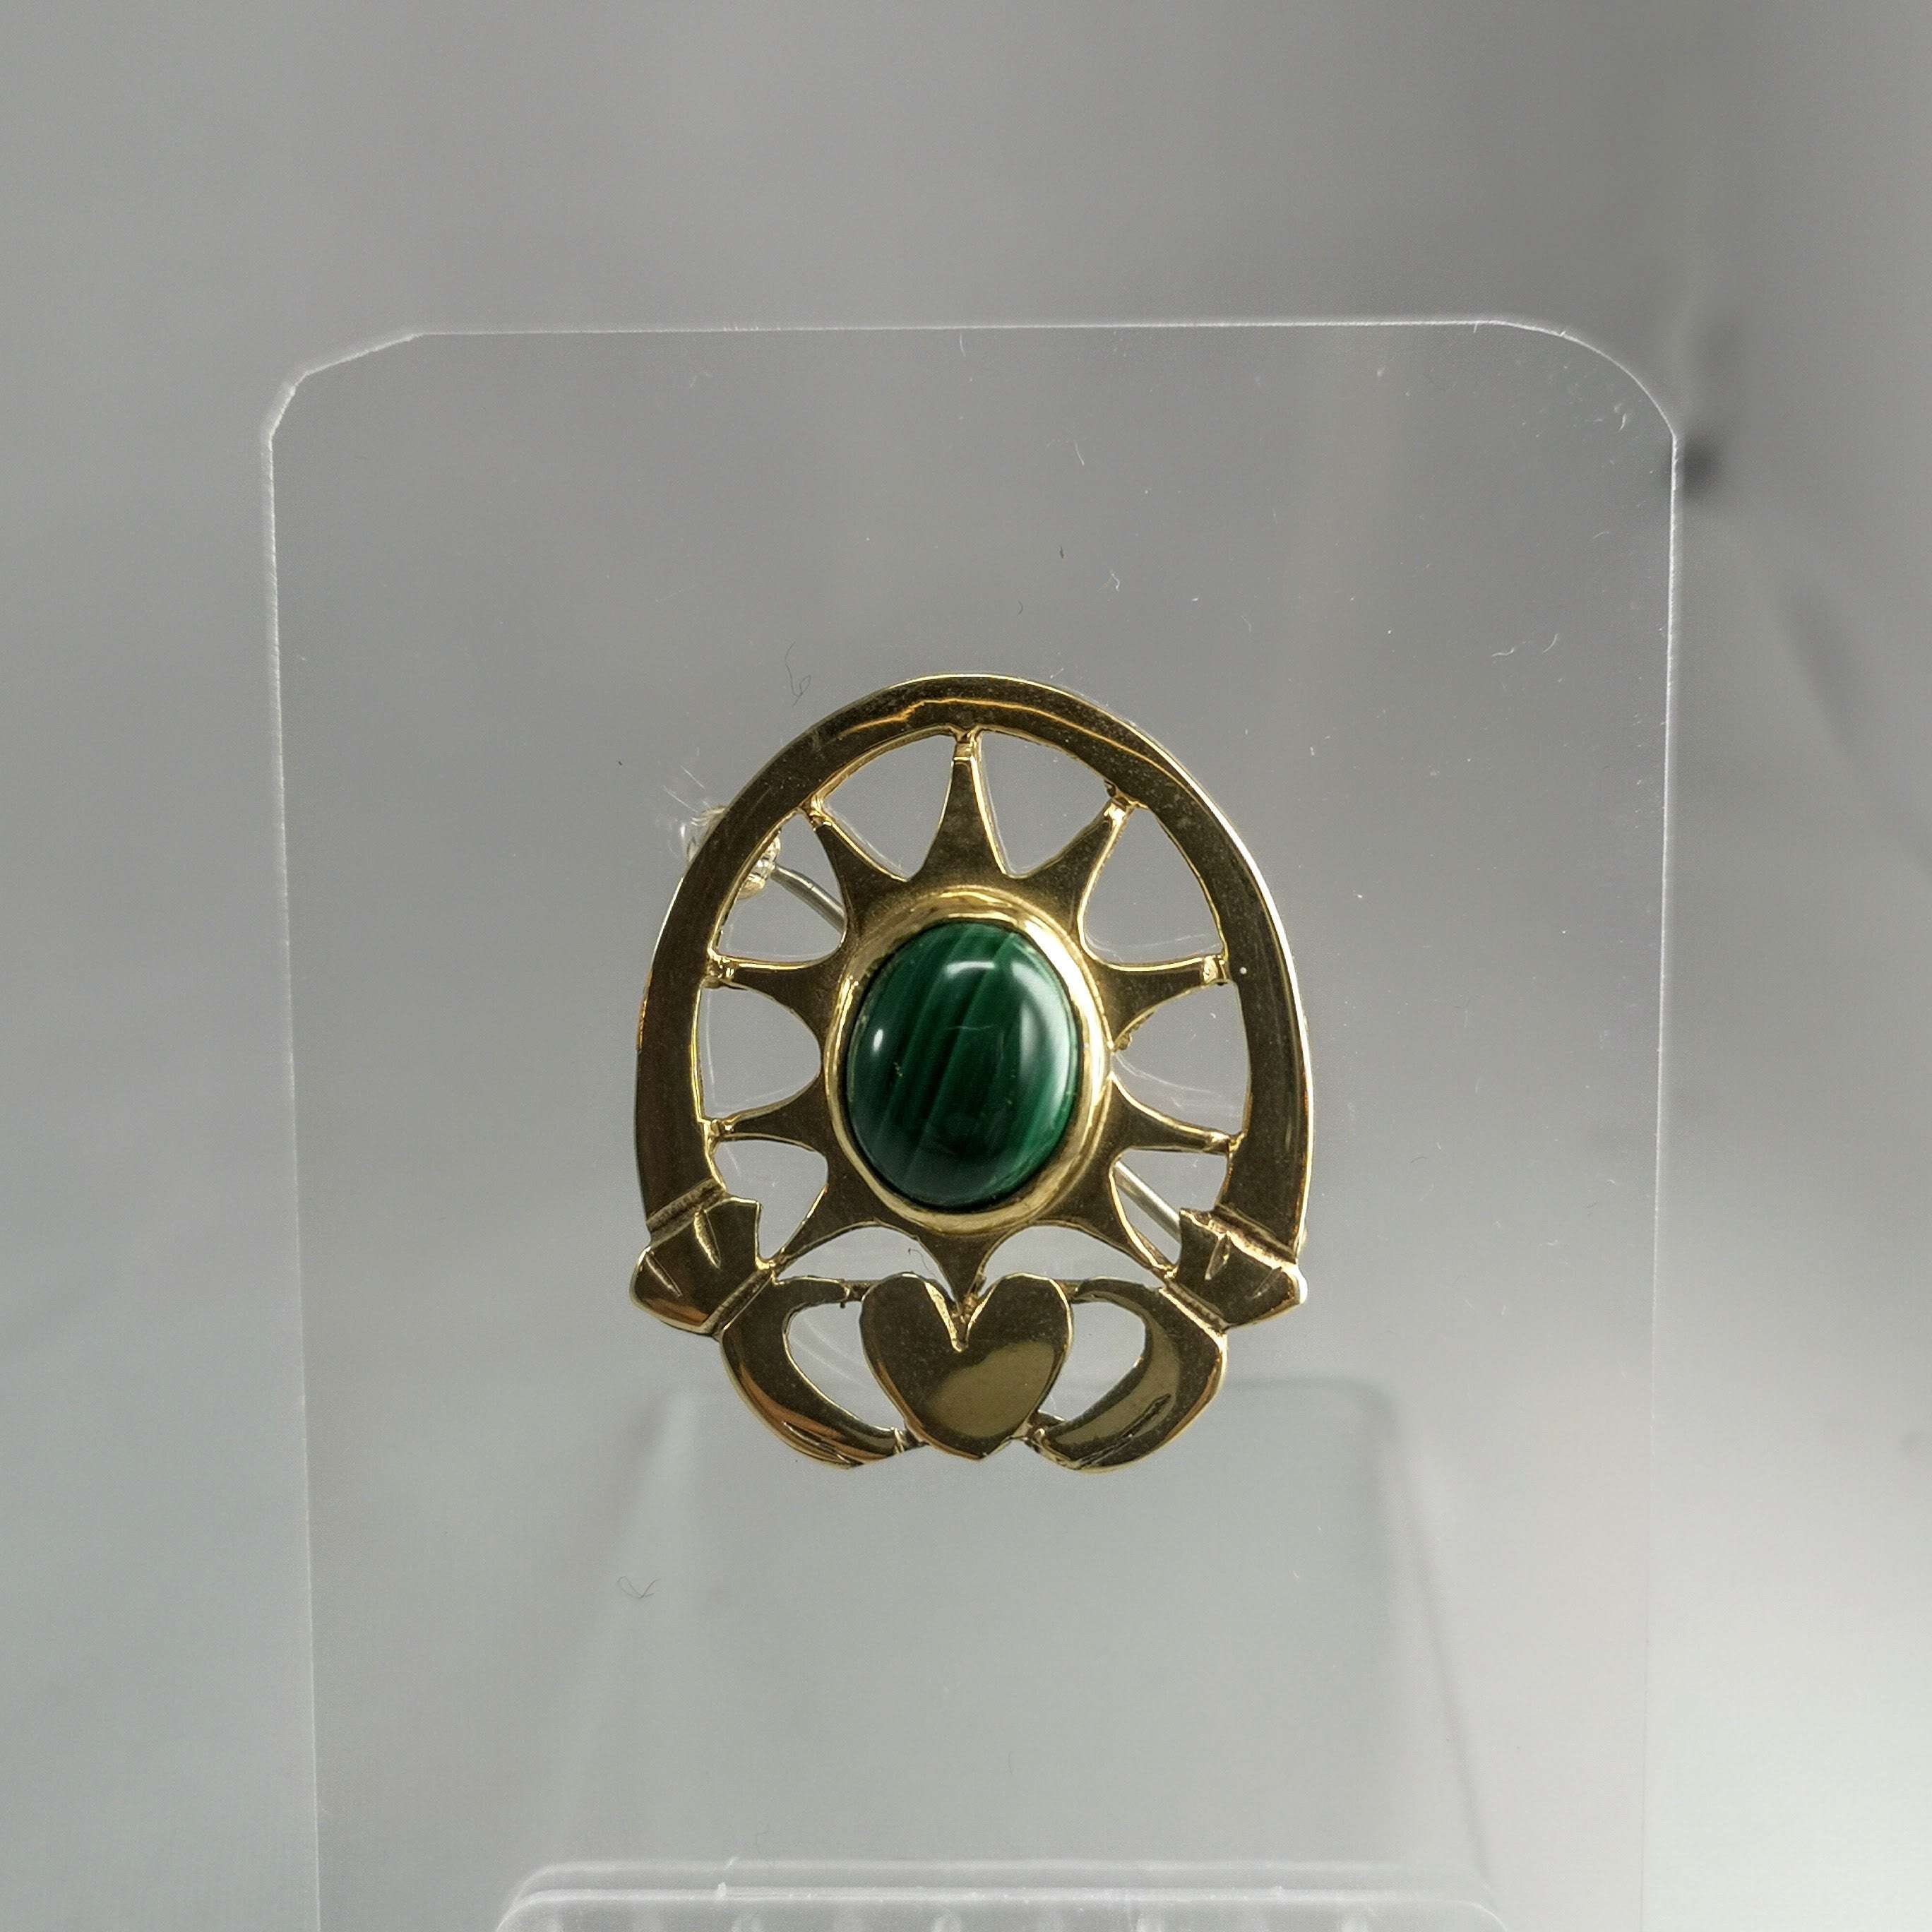 9ct gold Heavy claddagh brooch with Malachite stone